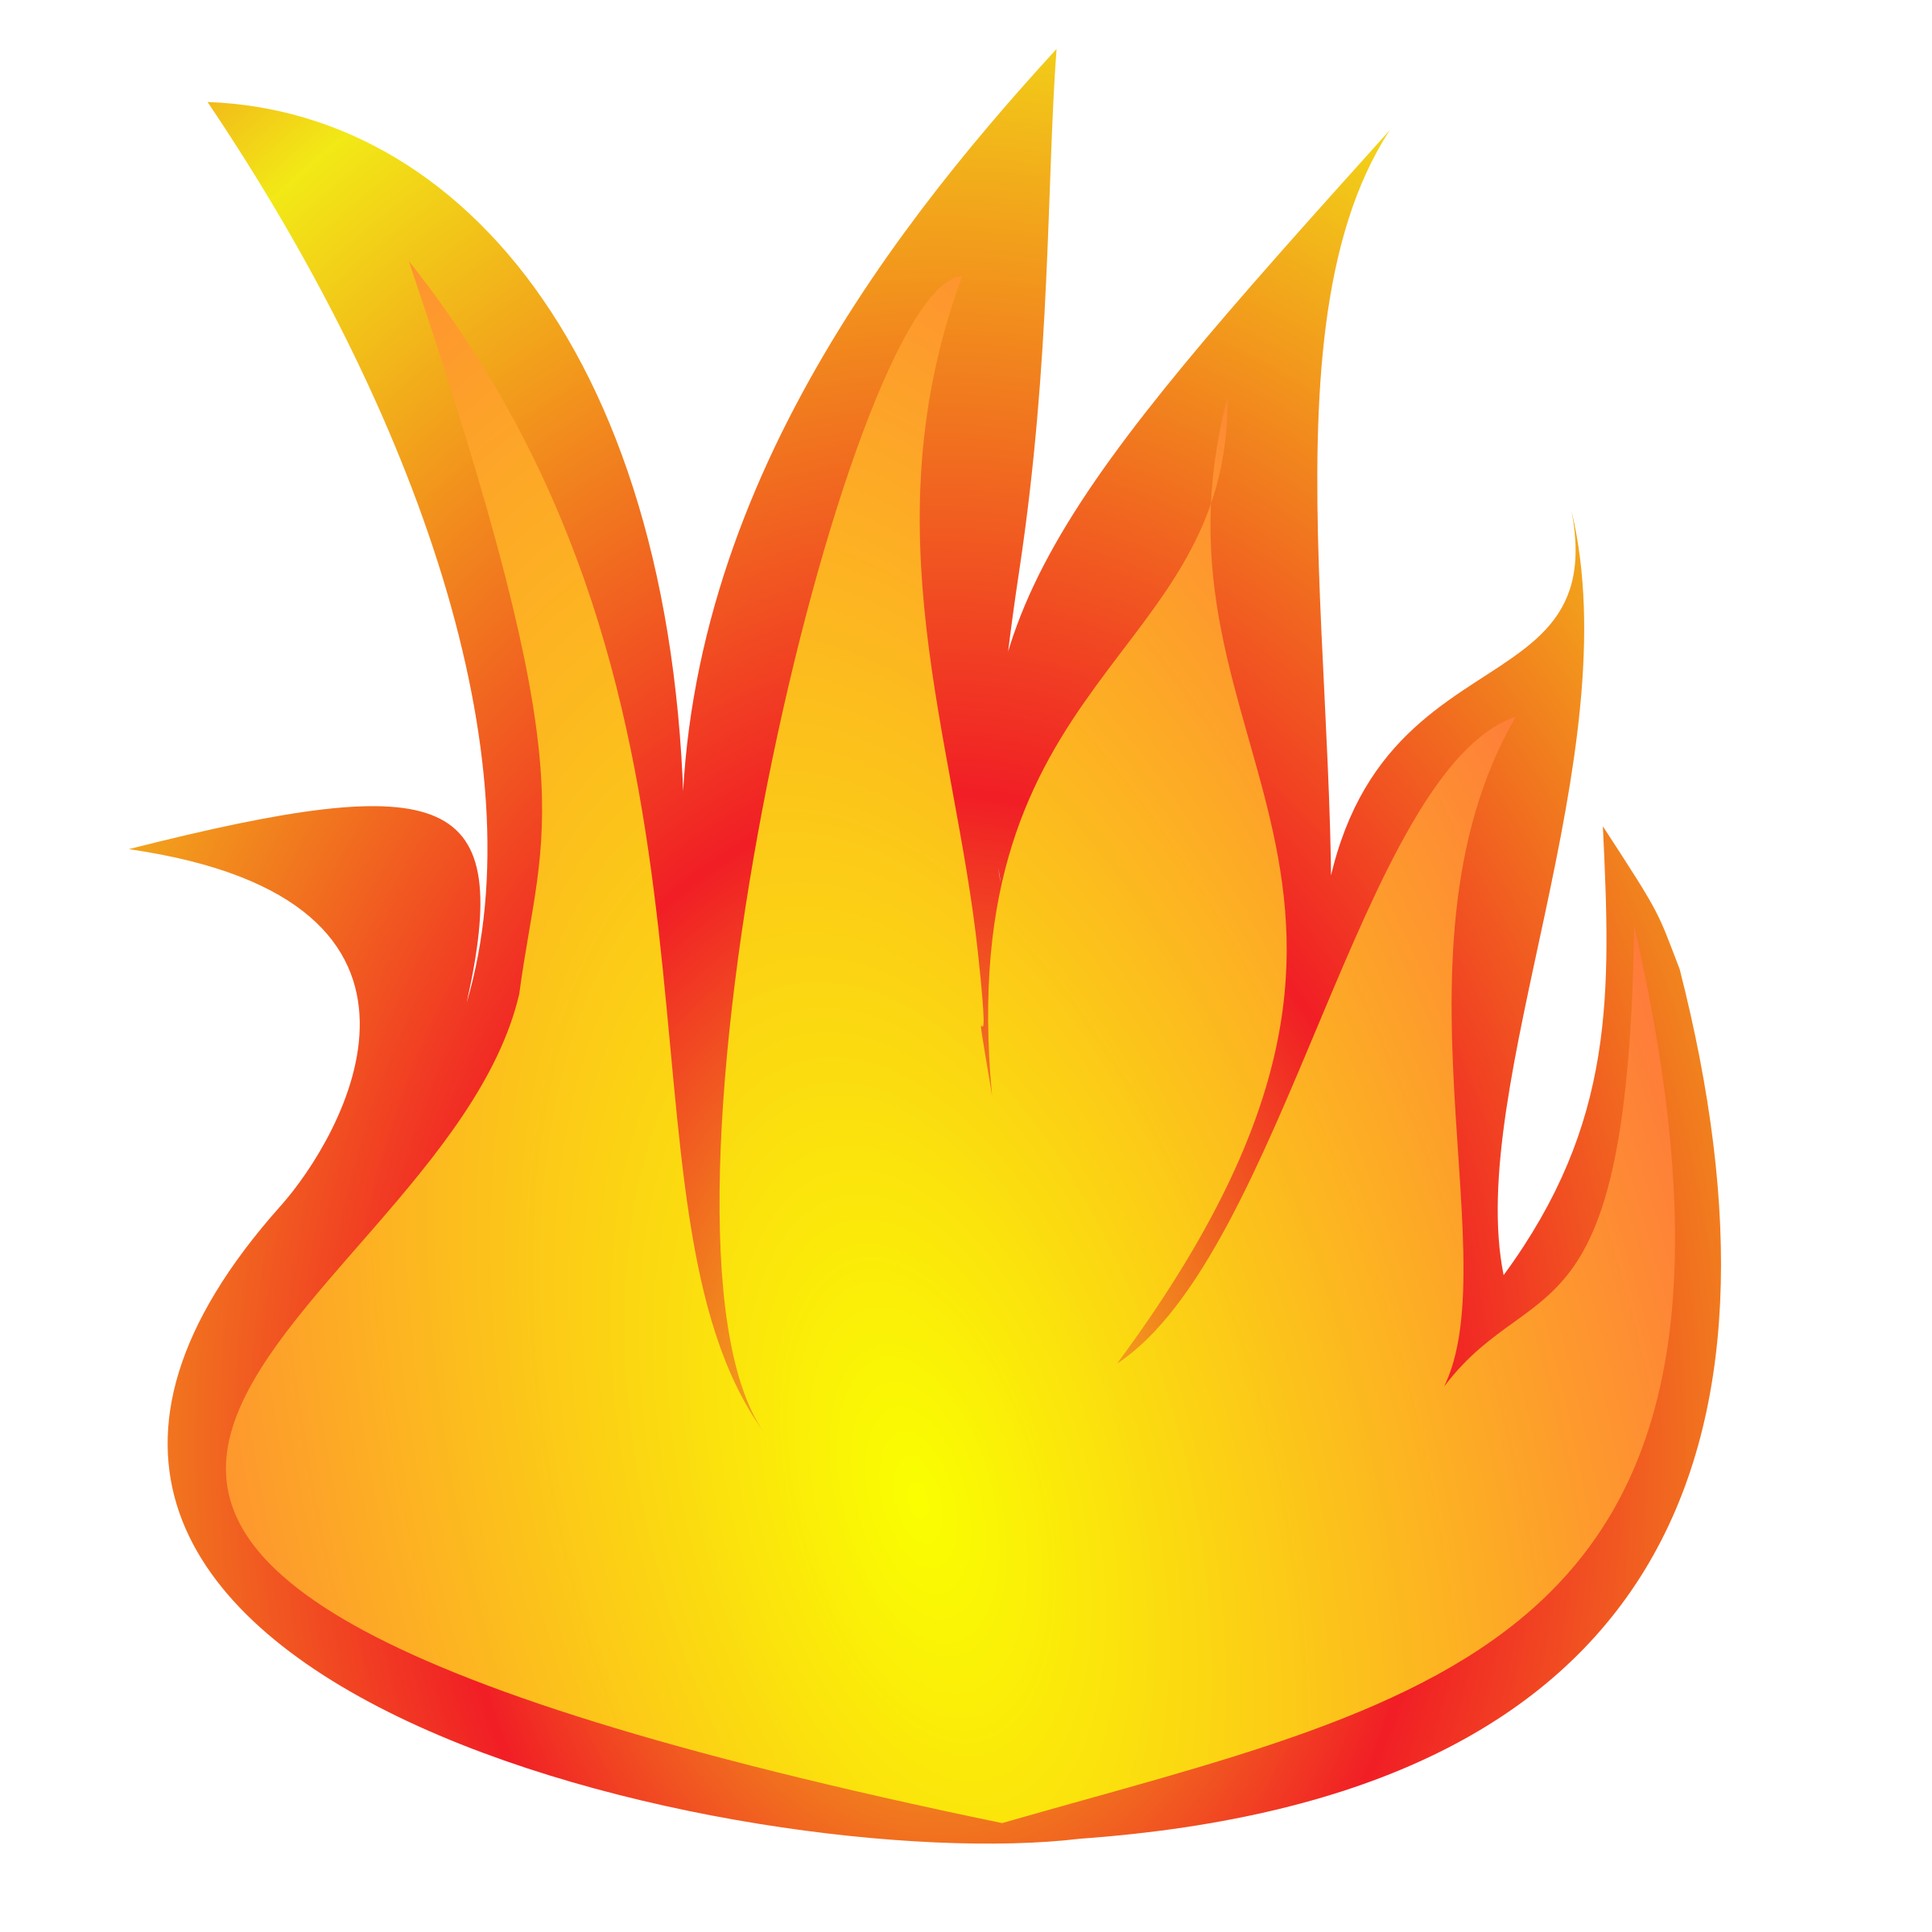 Fire flame clipart 2